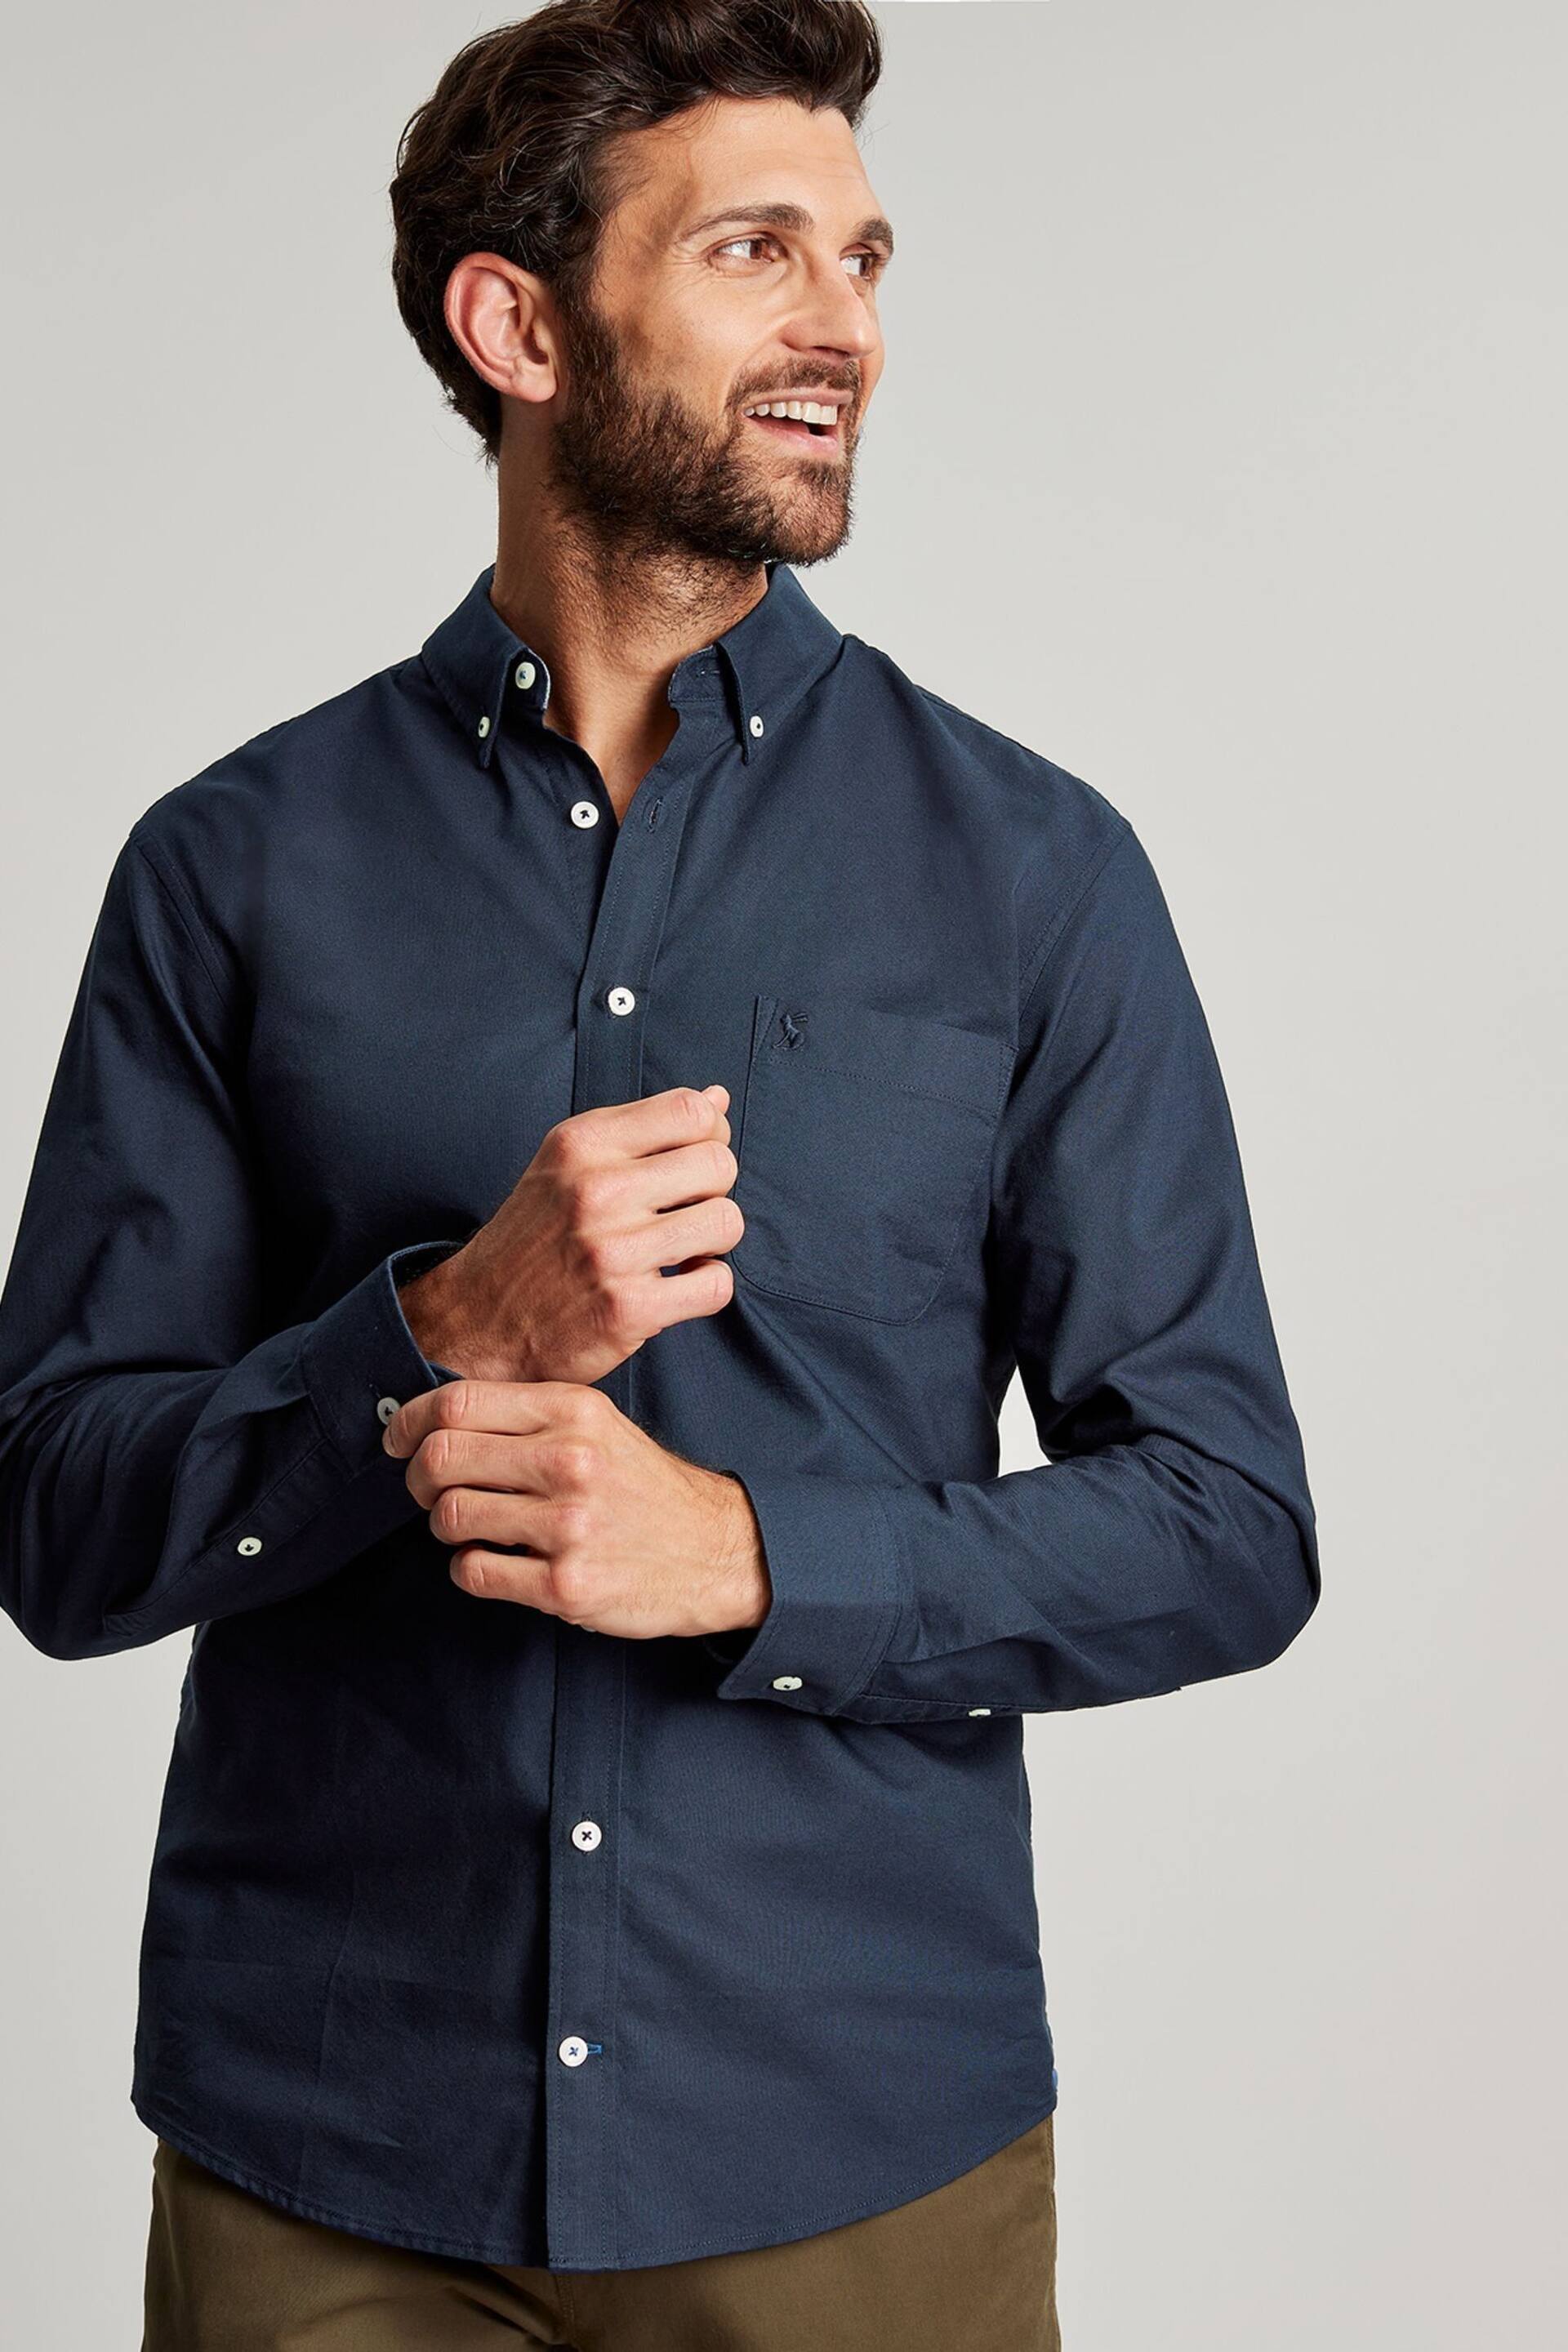 Joules Oxford Navy Blue Long Sleeve Oxford Shirt - Image 4 of 7